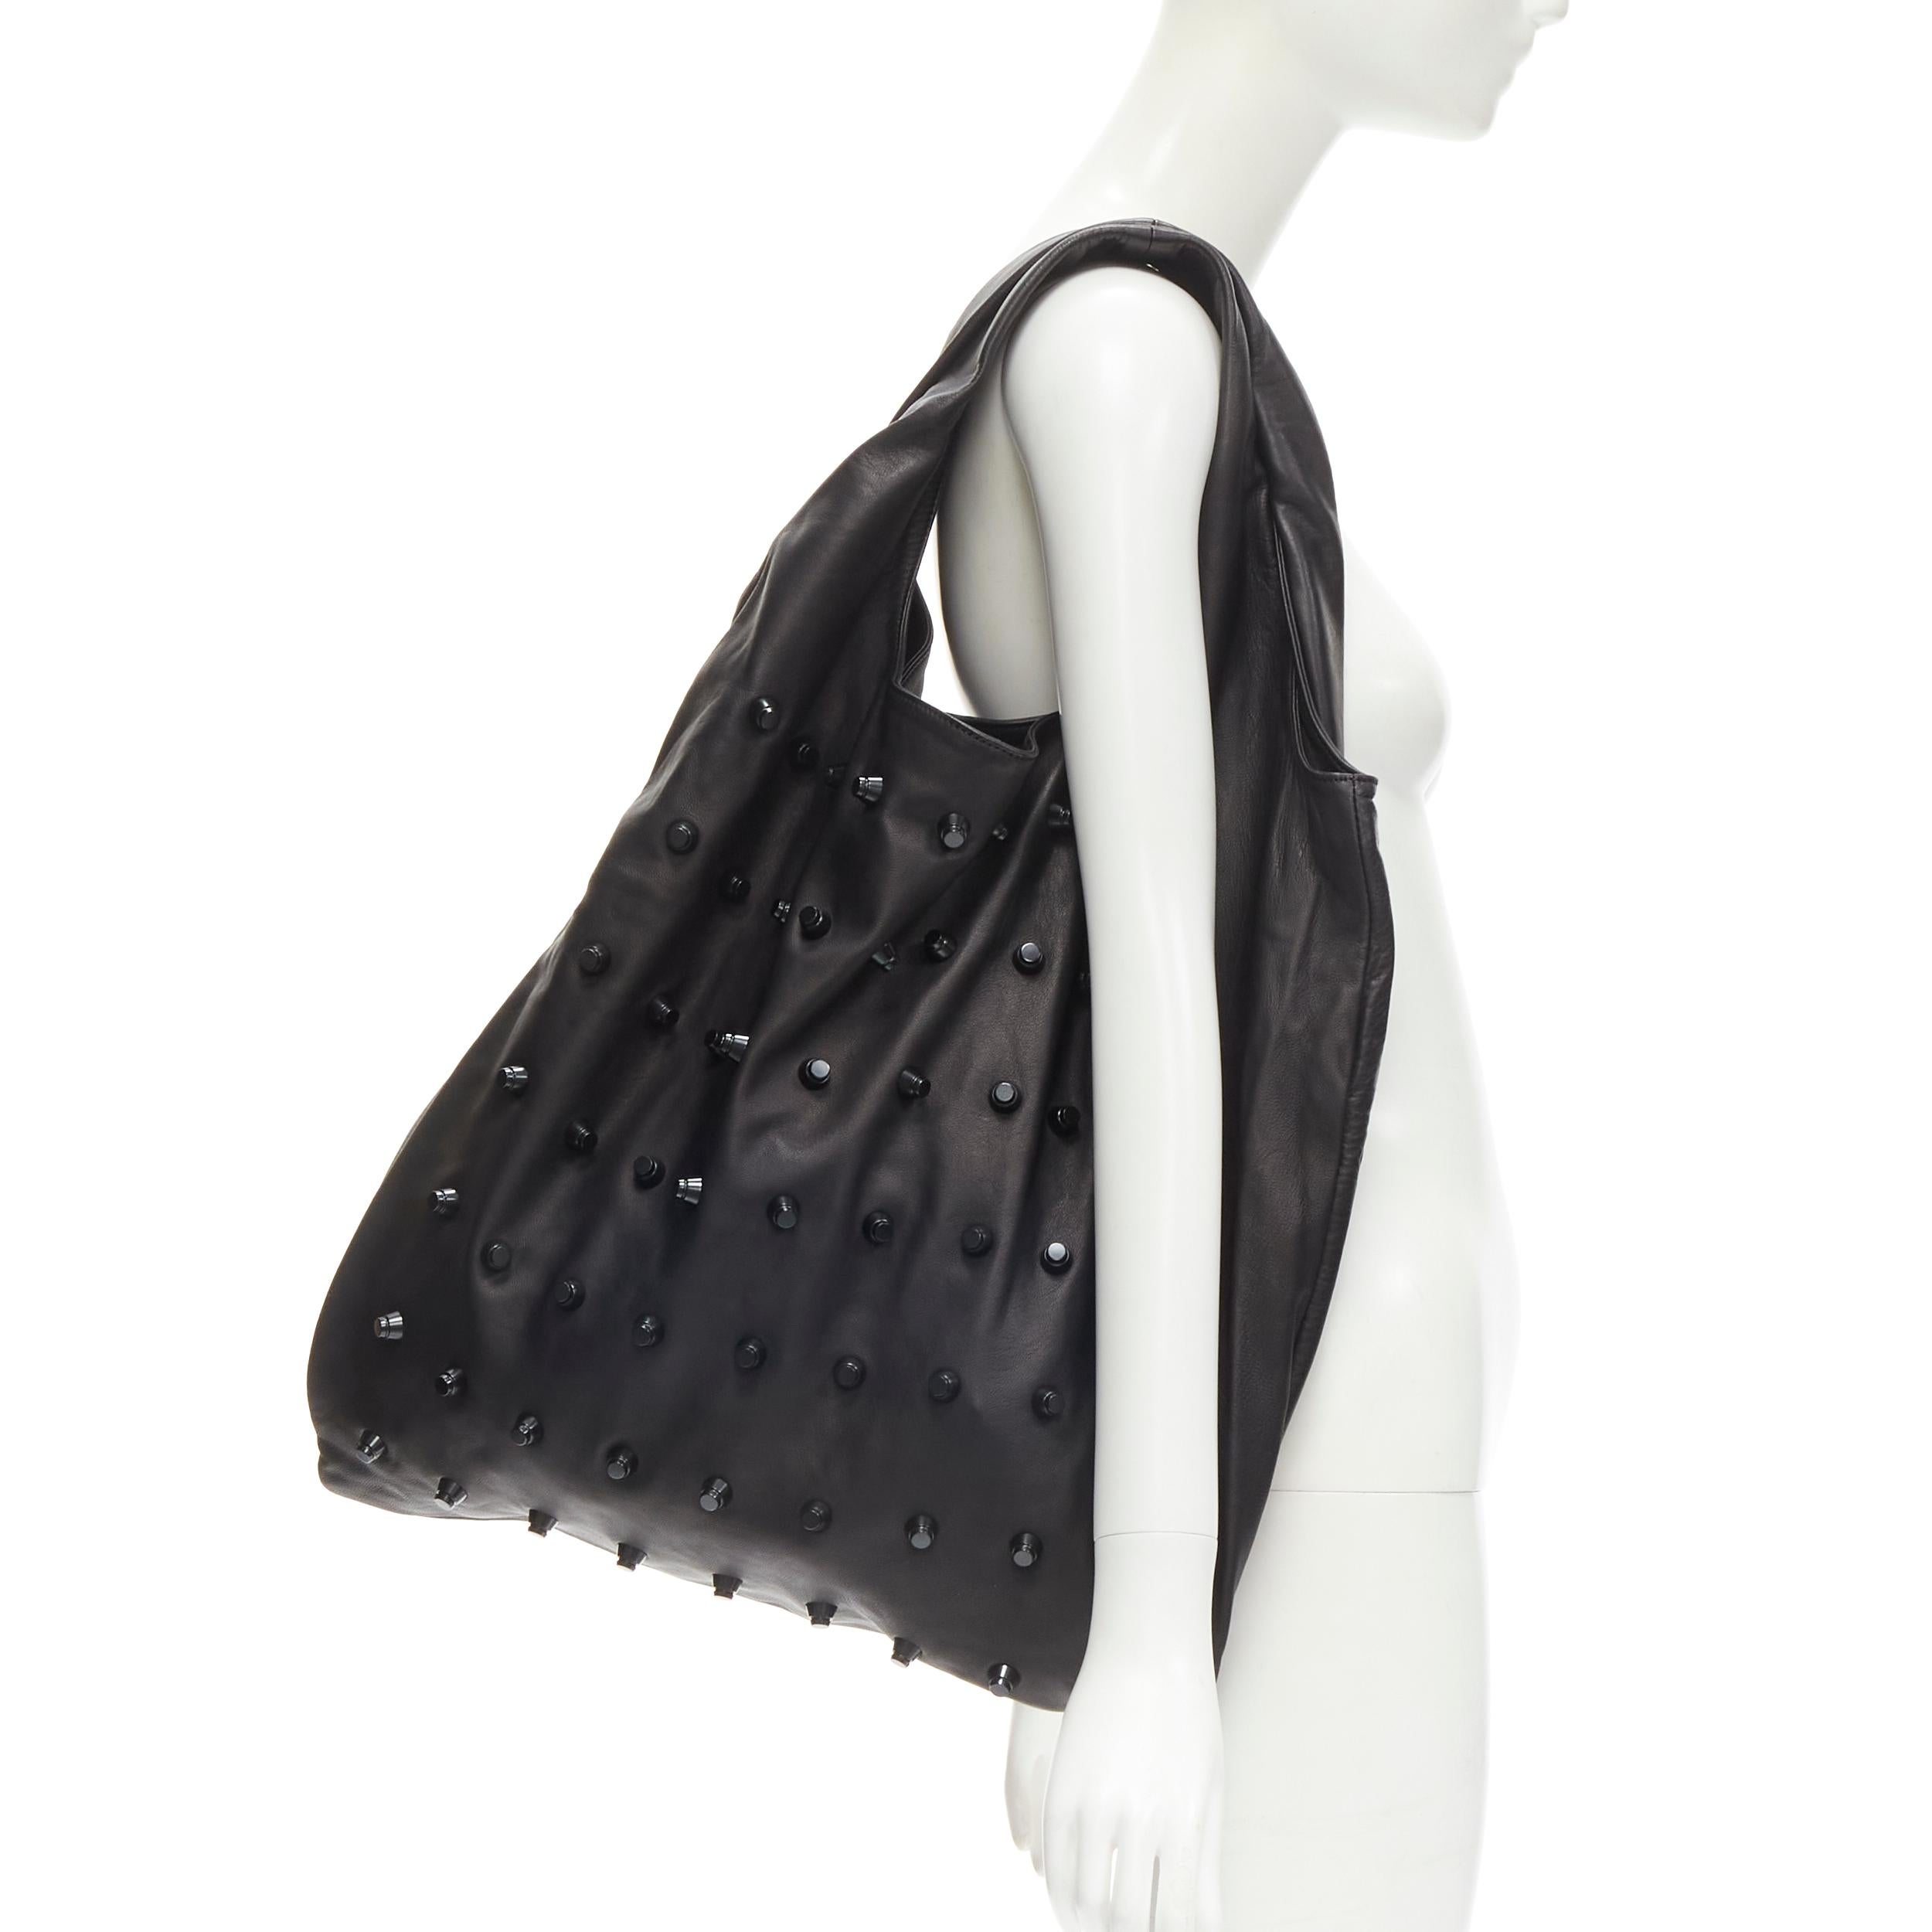 ALEXANDER WANG black soft leather punk studded tote bag
Brand: Alexander Wang
Designer: Alexander Wang
Material: Leather
Color: Black
Pattern: Solid
Extra Detail: Zip wall compartment.

CONDITION:
Condition: Very good, this item was pre-owned and is